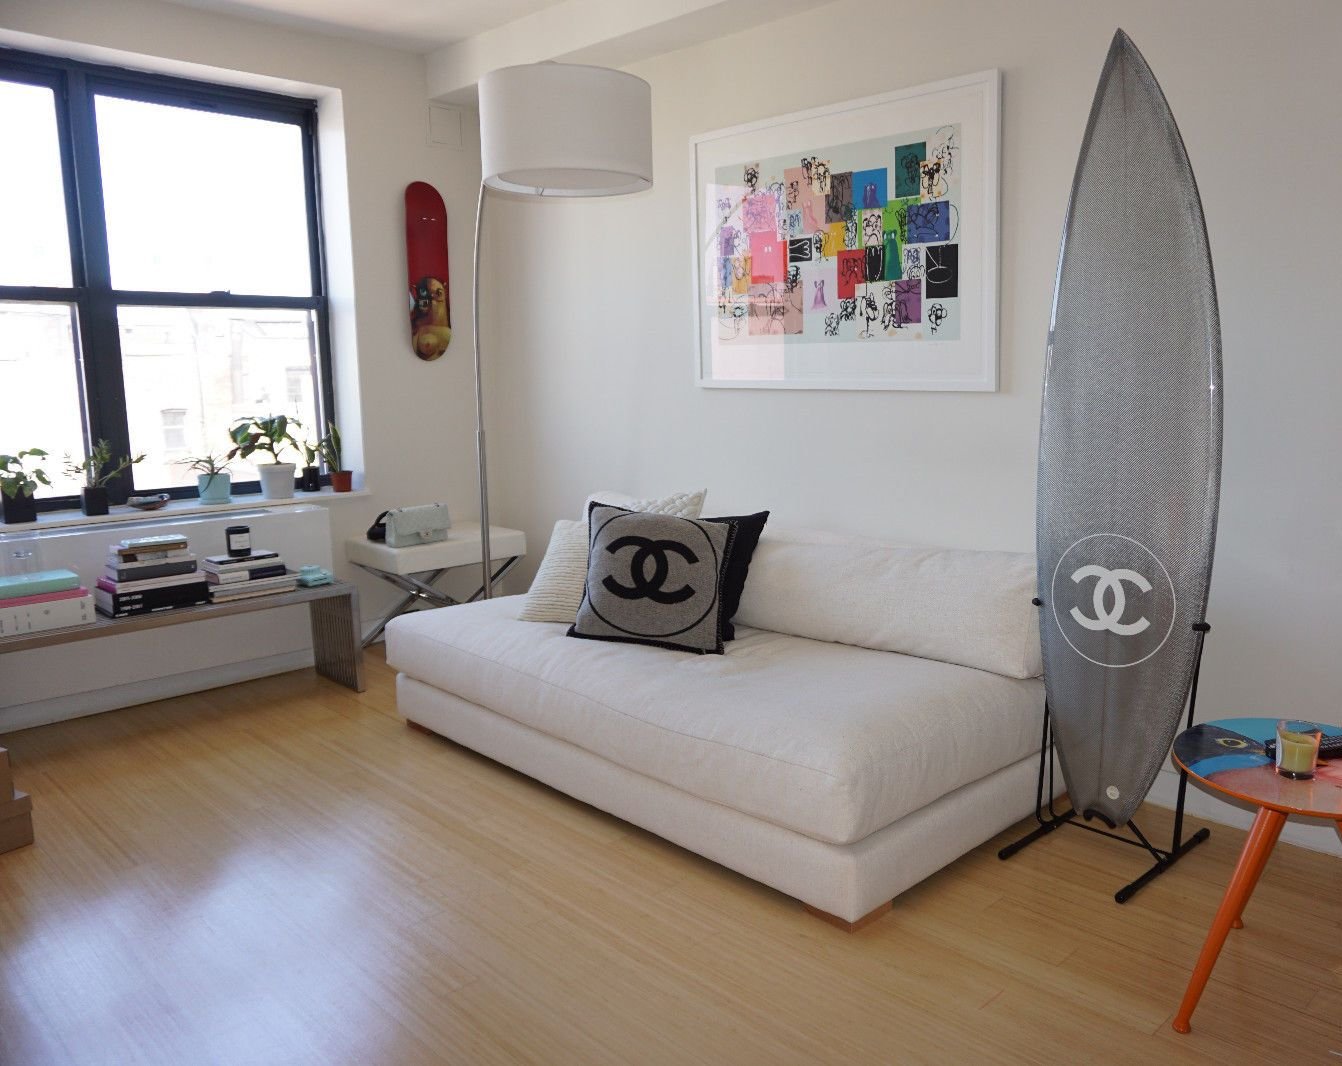 Philippe Barland Limited Edition Silver Carbon Surfboard